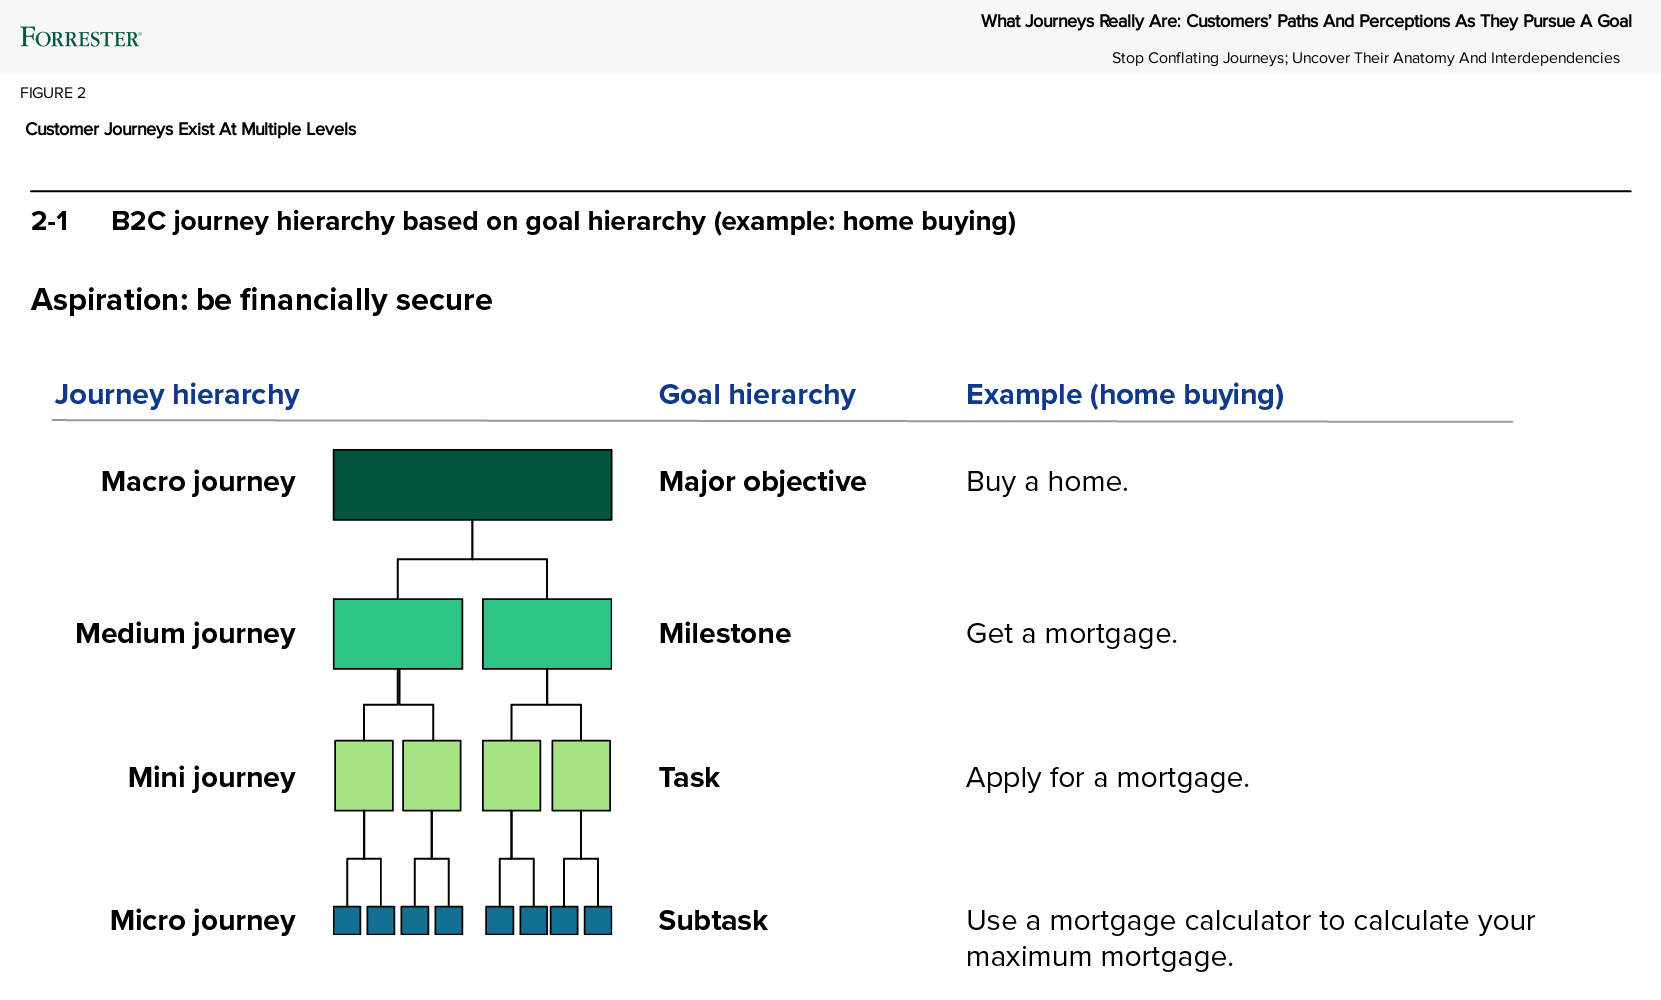 Journeys exist at multiple levels. this graphic shows that the home buying journeys can be thought of in 4 different levels